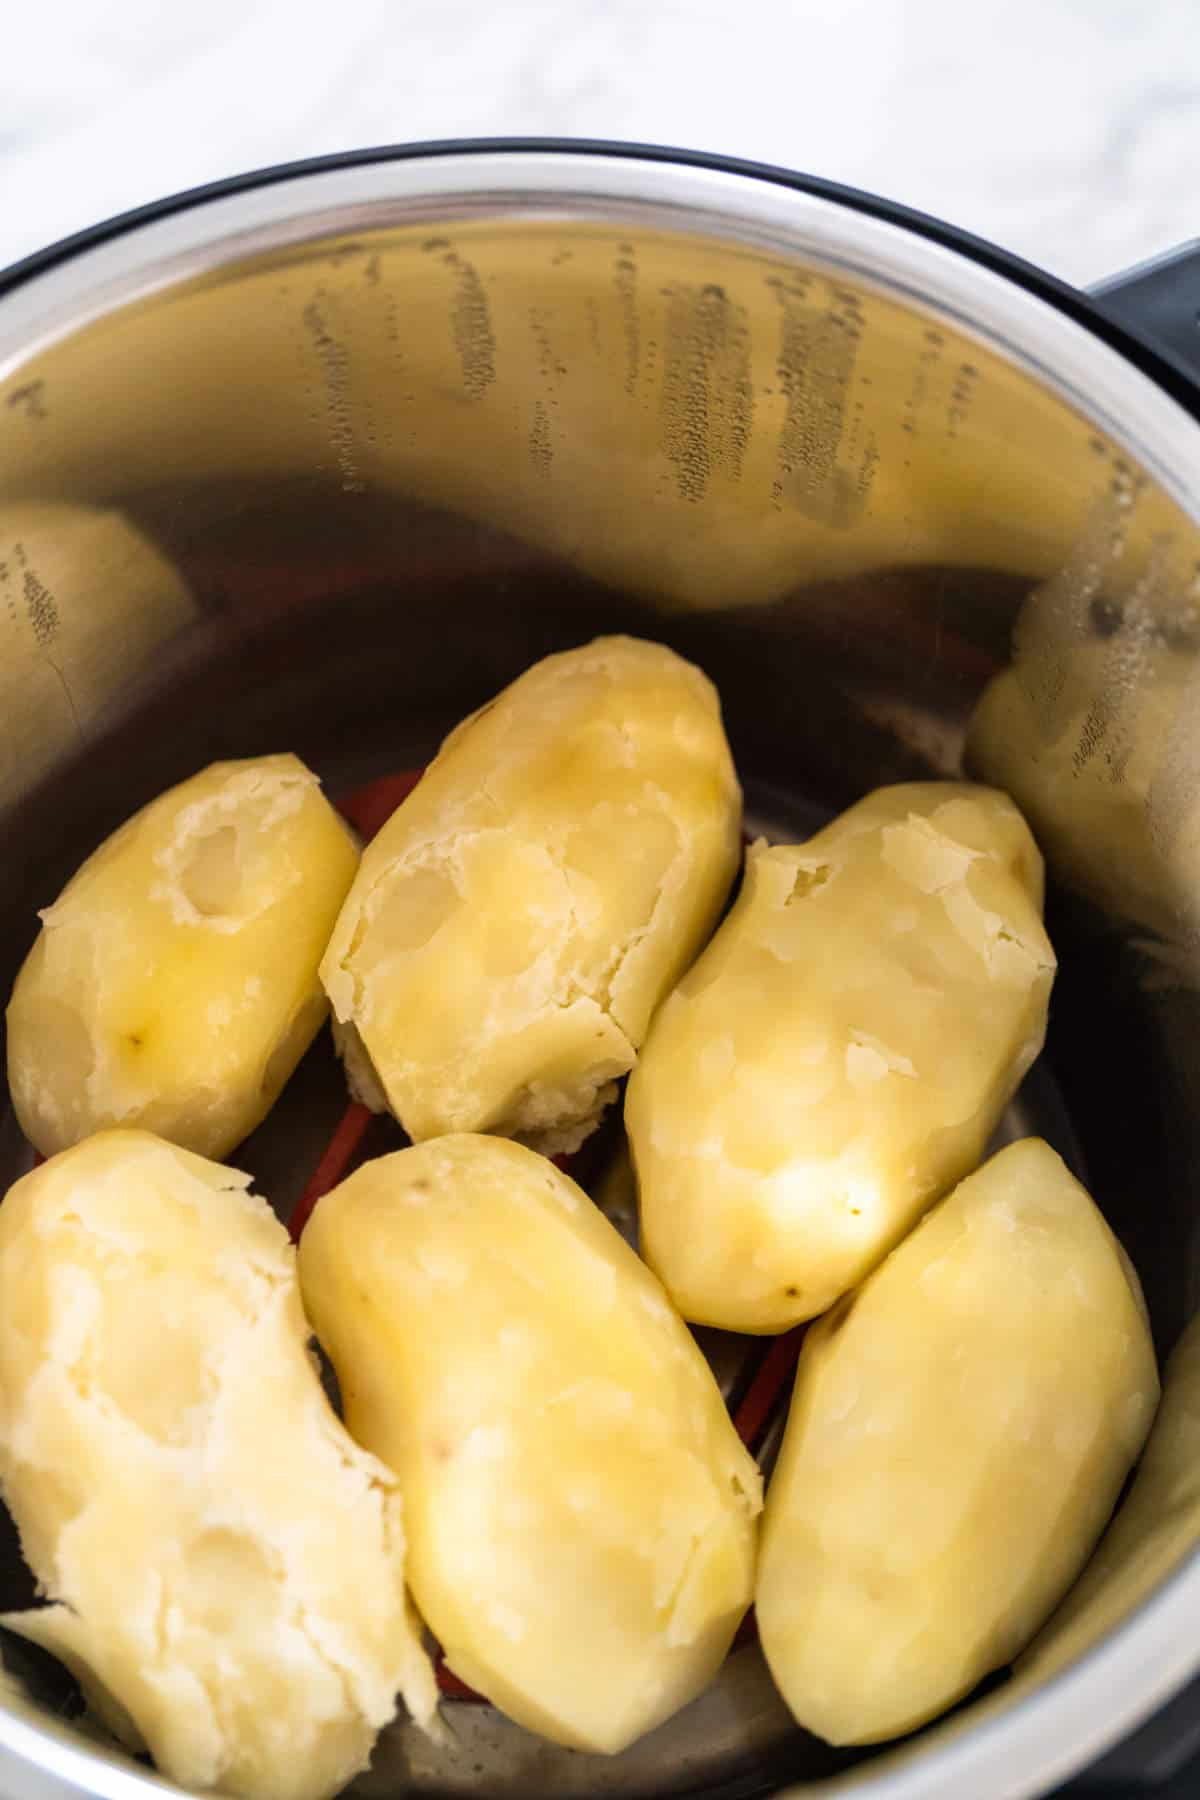 Letting cooked potatoes sit in pot to dry out.